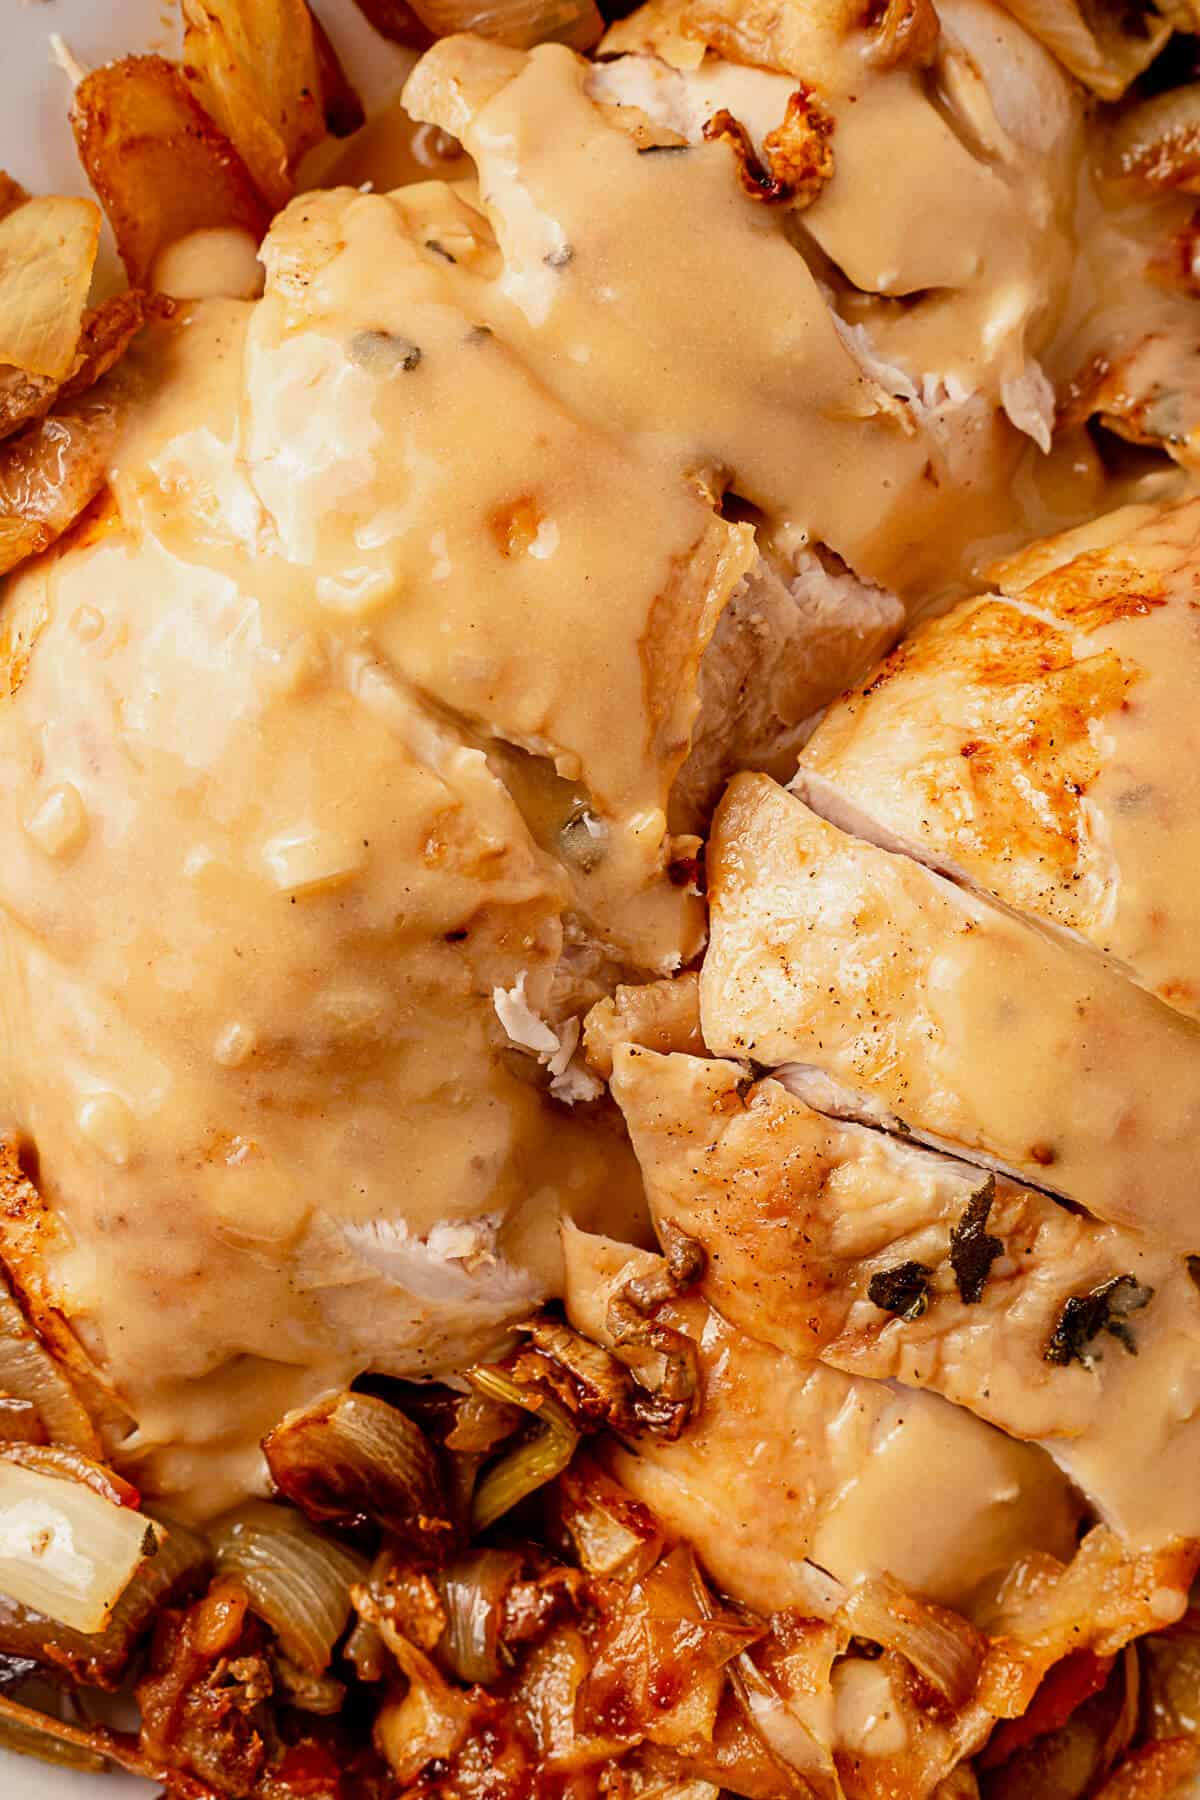 two roasted turkey breasts covered in gluten free gravy